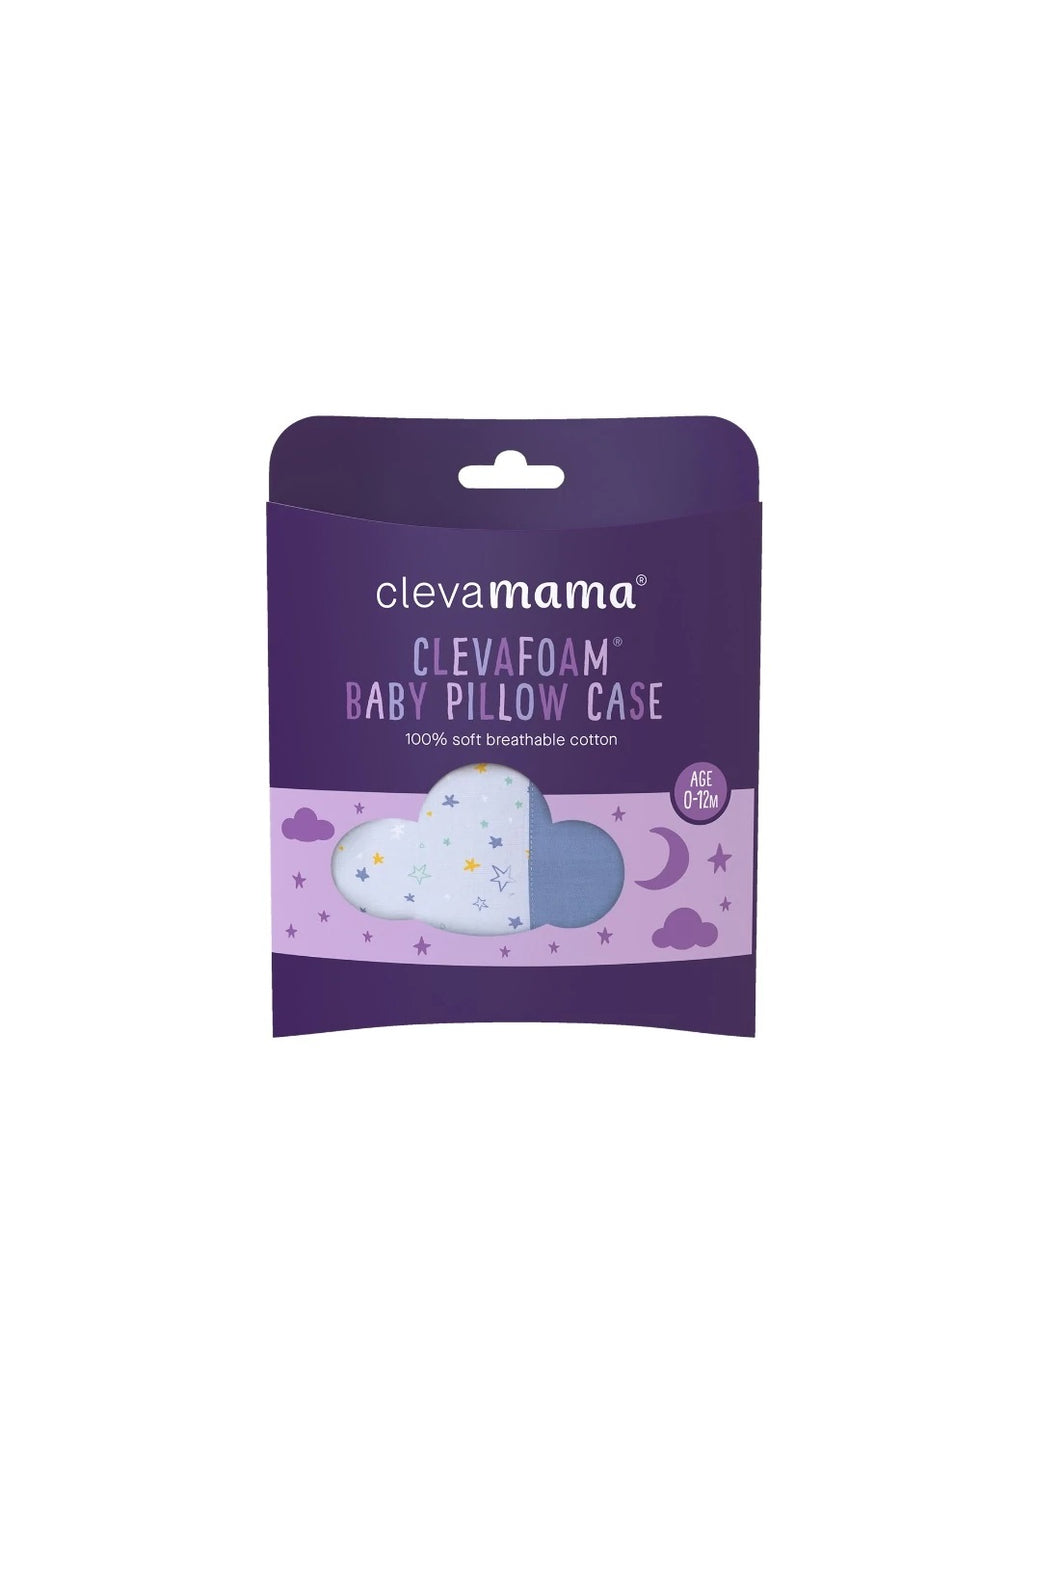 Clevamama Baby Pillow Case Blue 1